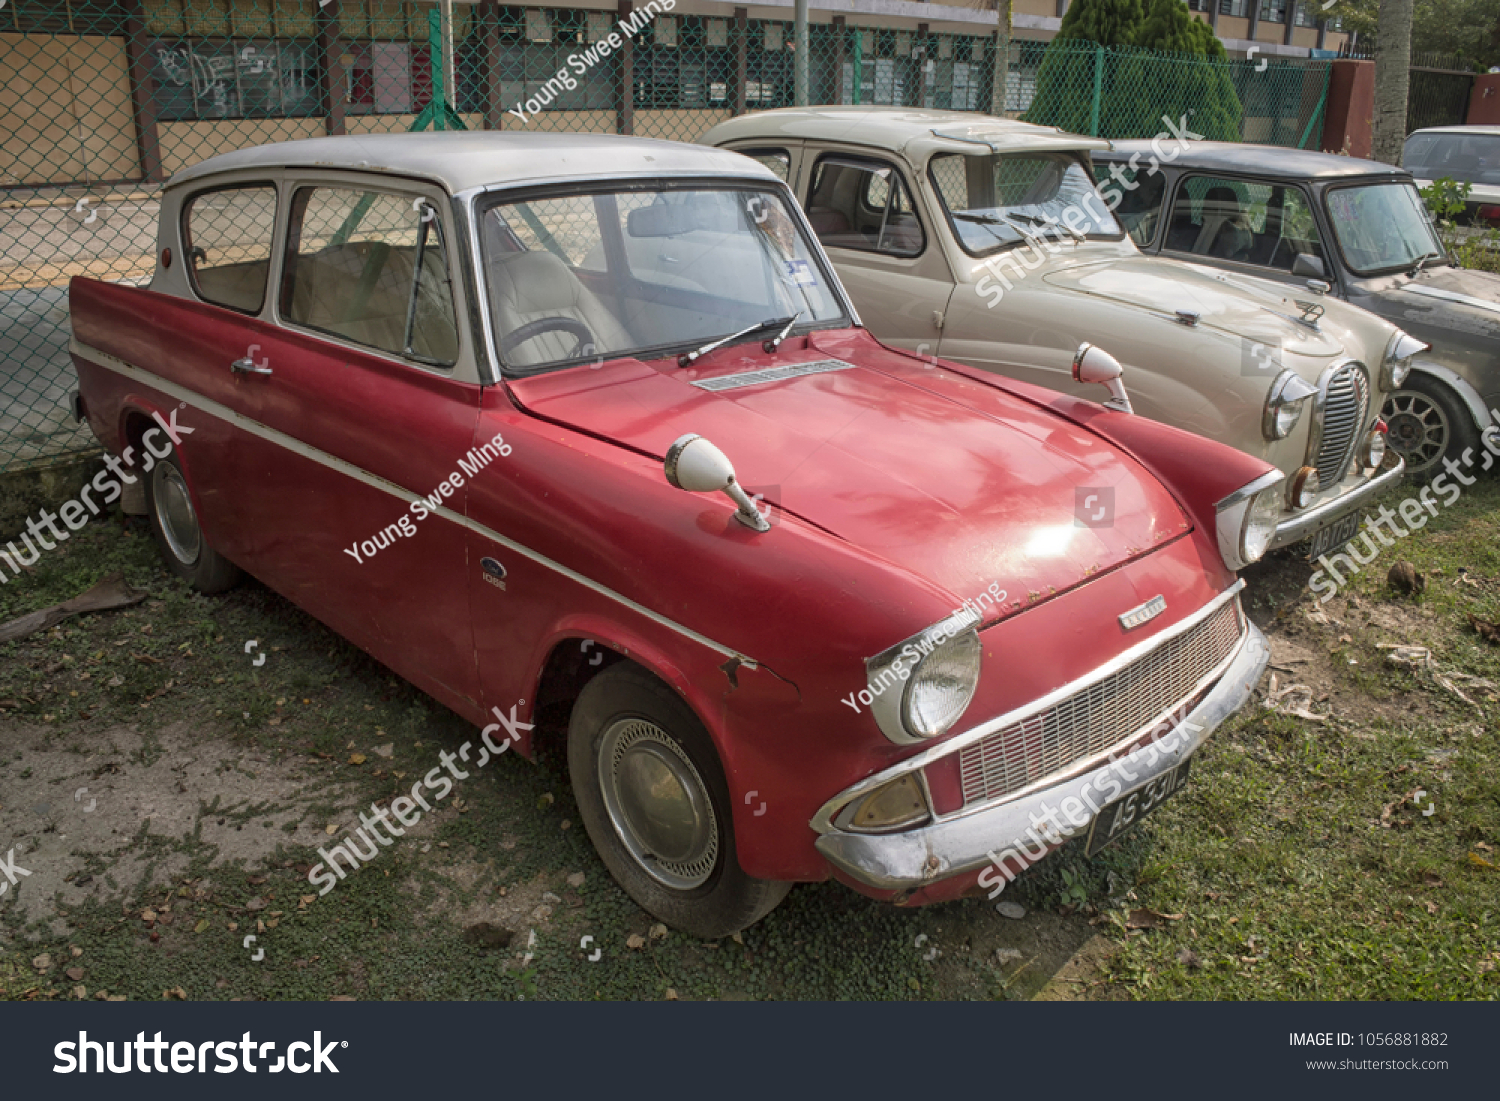 Classic Car For Sale Malaysia - Mercedes Benz 190 1960 1 9 In Selangor